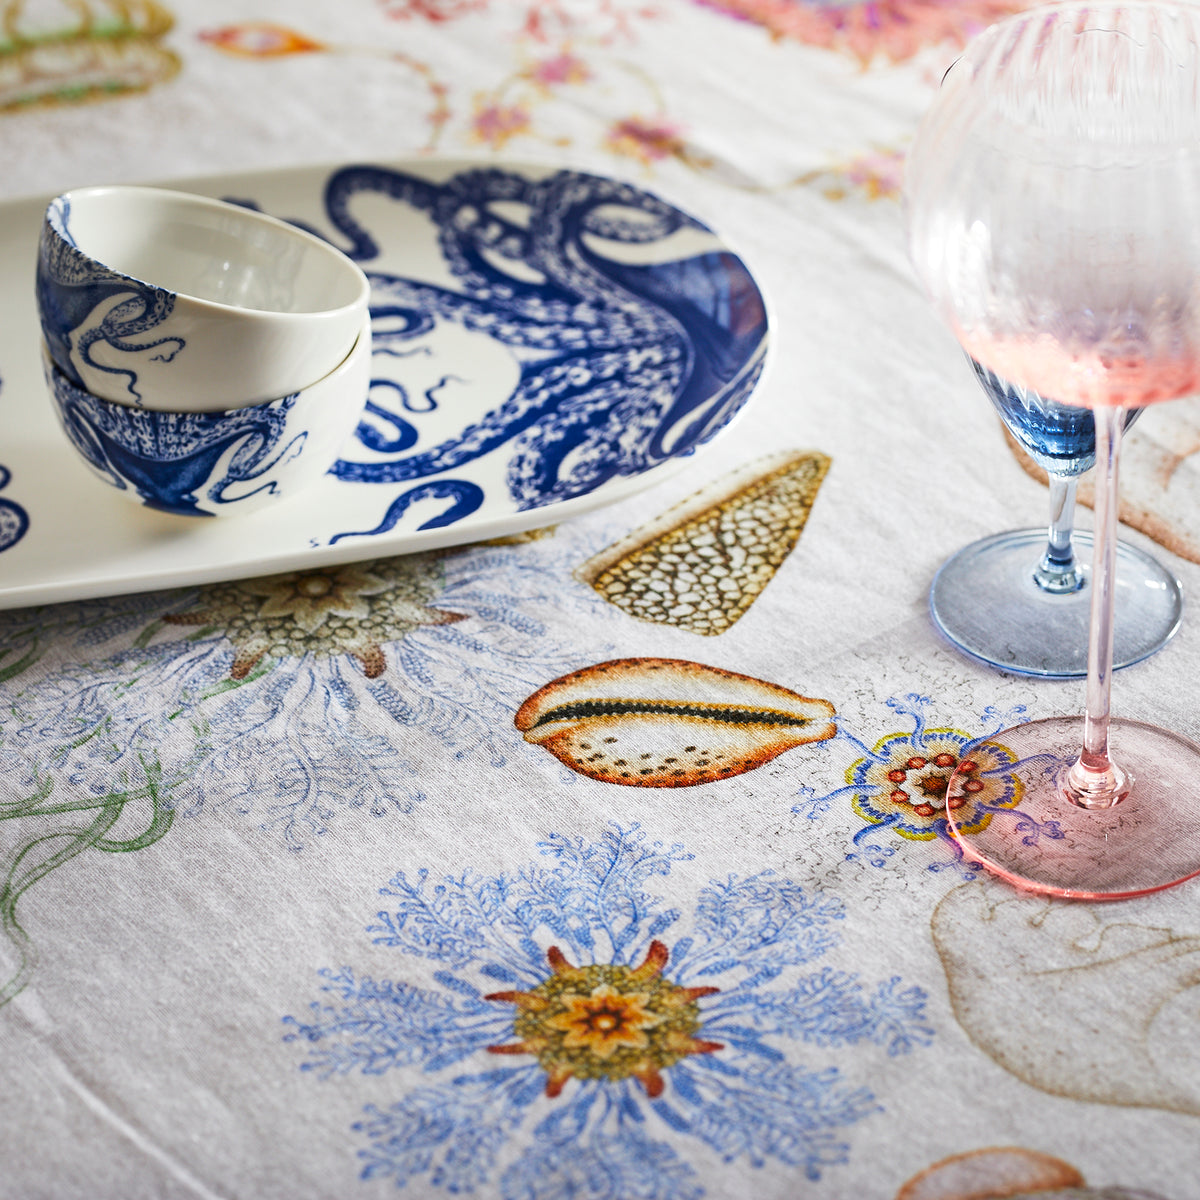 A table set with a detailed sea-themed white tablecloth, a white cup and saucer made of premium porcelain featuring blue sea creatures, two elegant stemmed glasses, one pink and one blue, and a Lucy Snack Bowl from Caskata Artisanal Home.